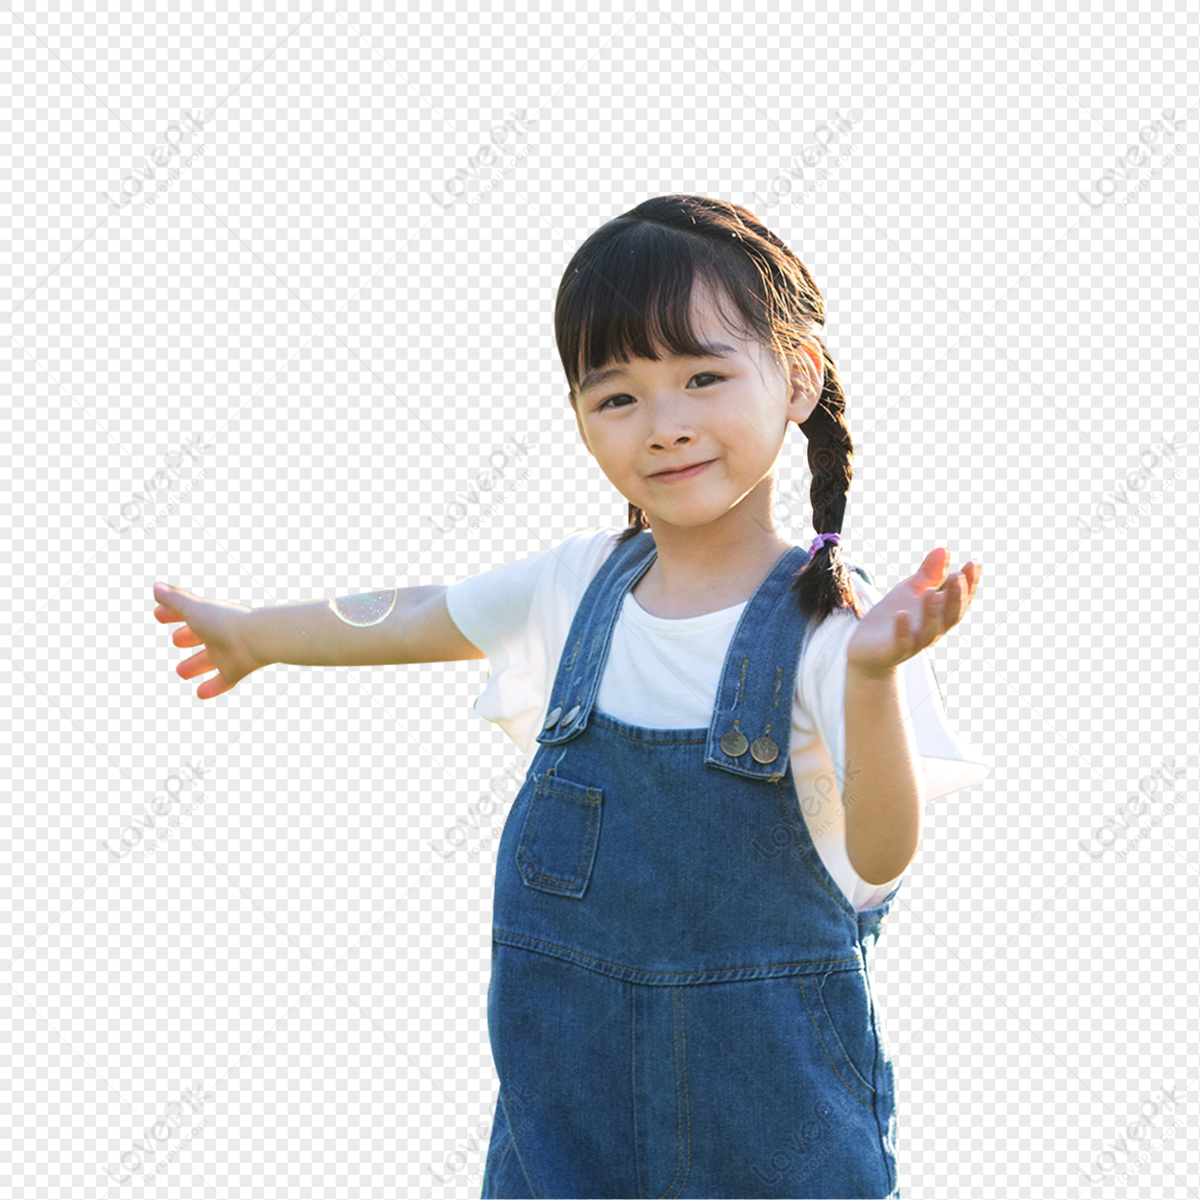 Girl Running PNG White Transparent And Clipart Image For Free Download ...